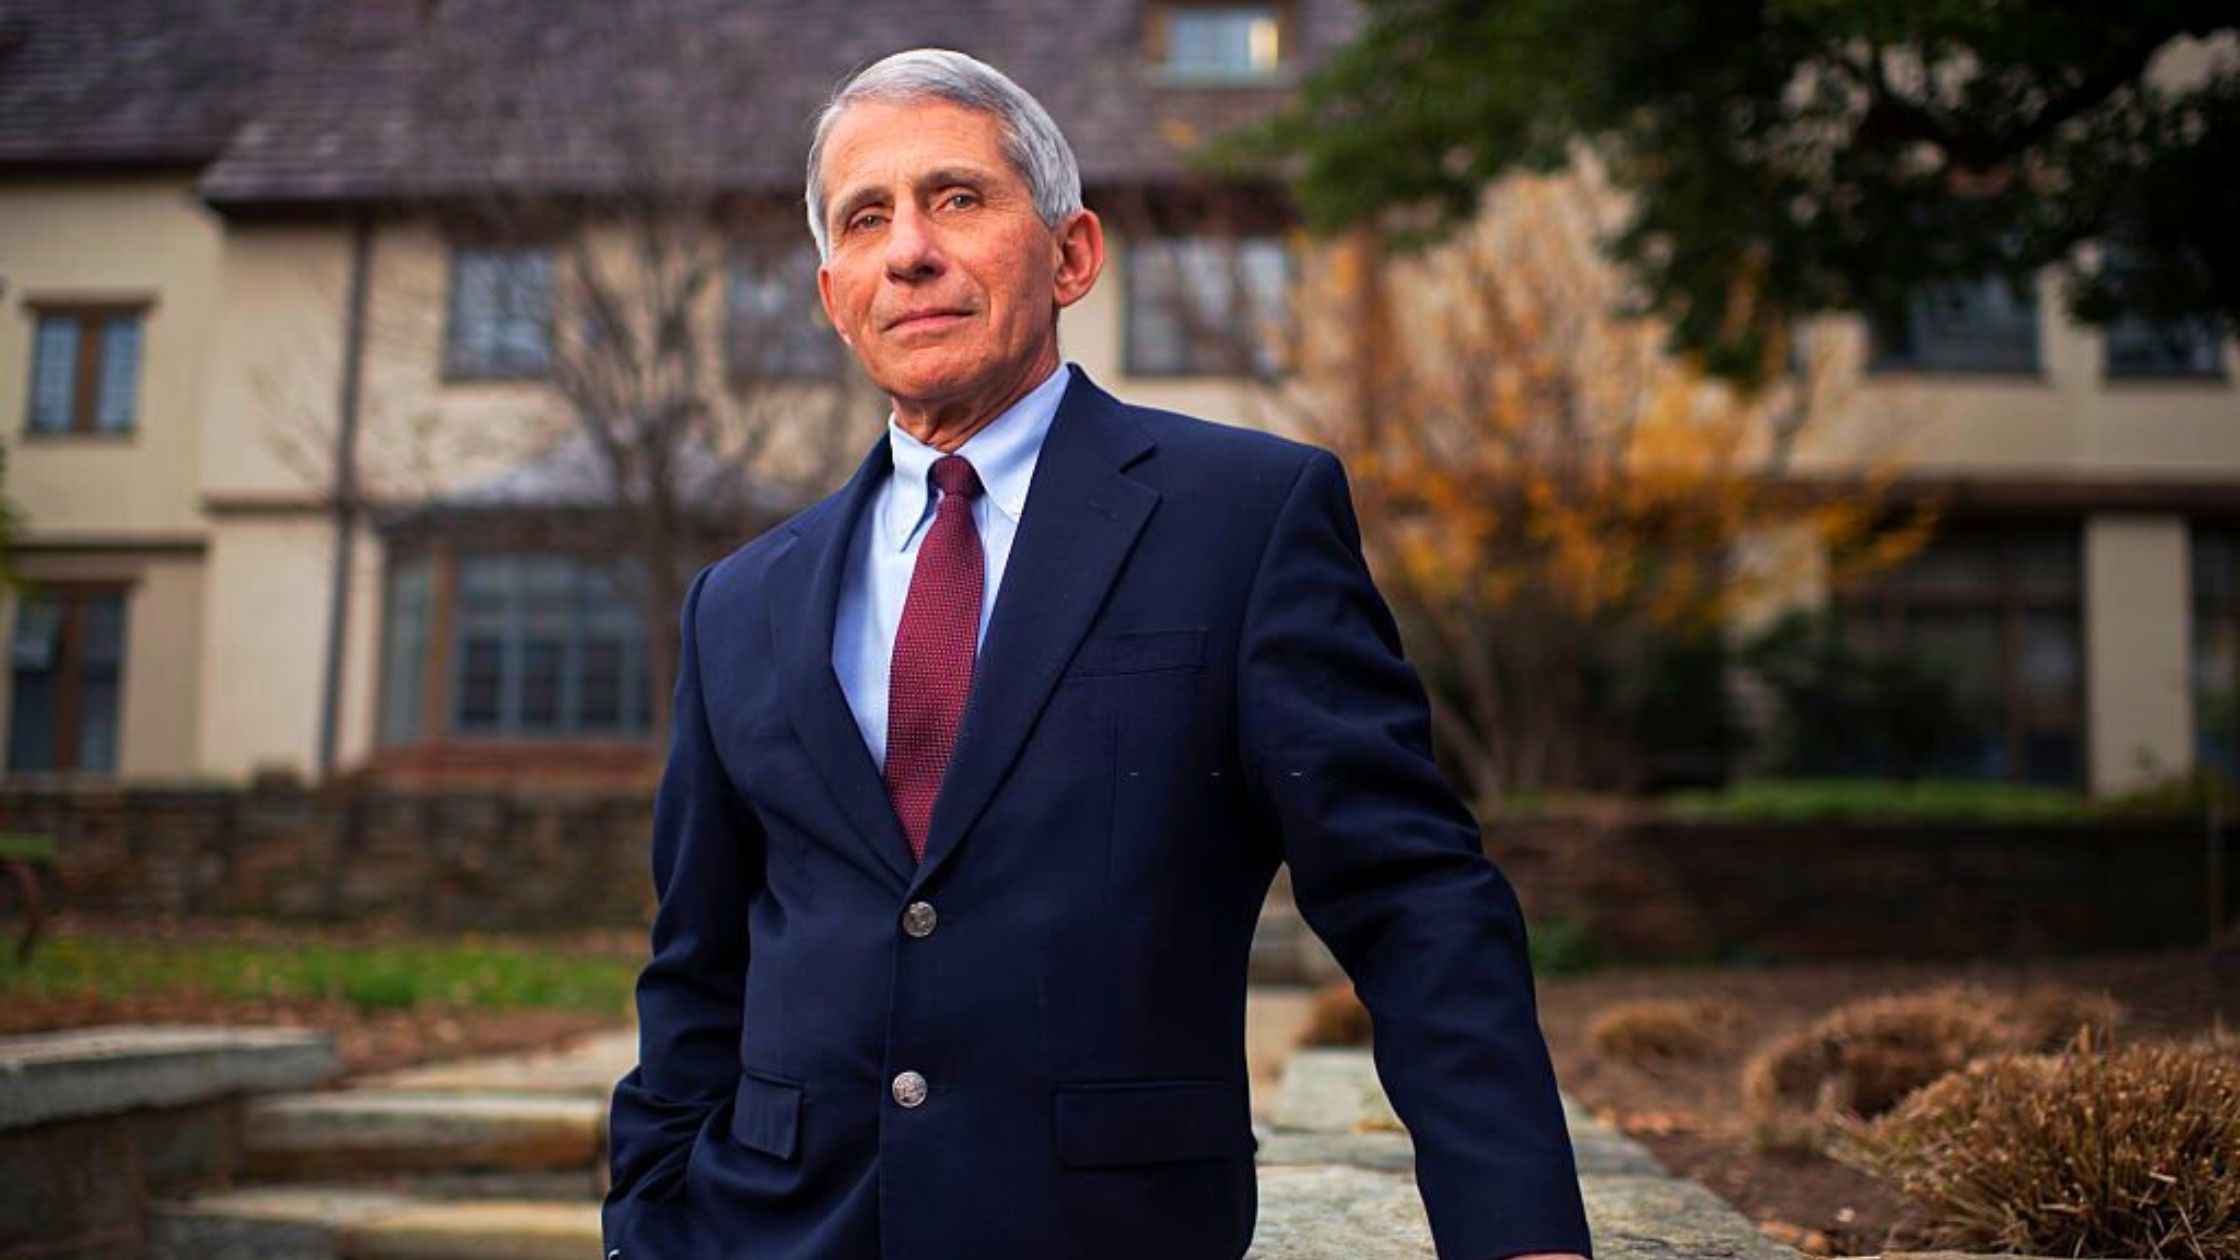 Pandemic Took A Toll On Dr. Anthony Fauci